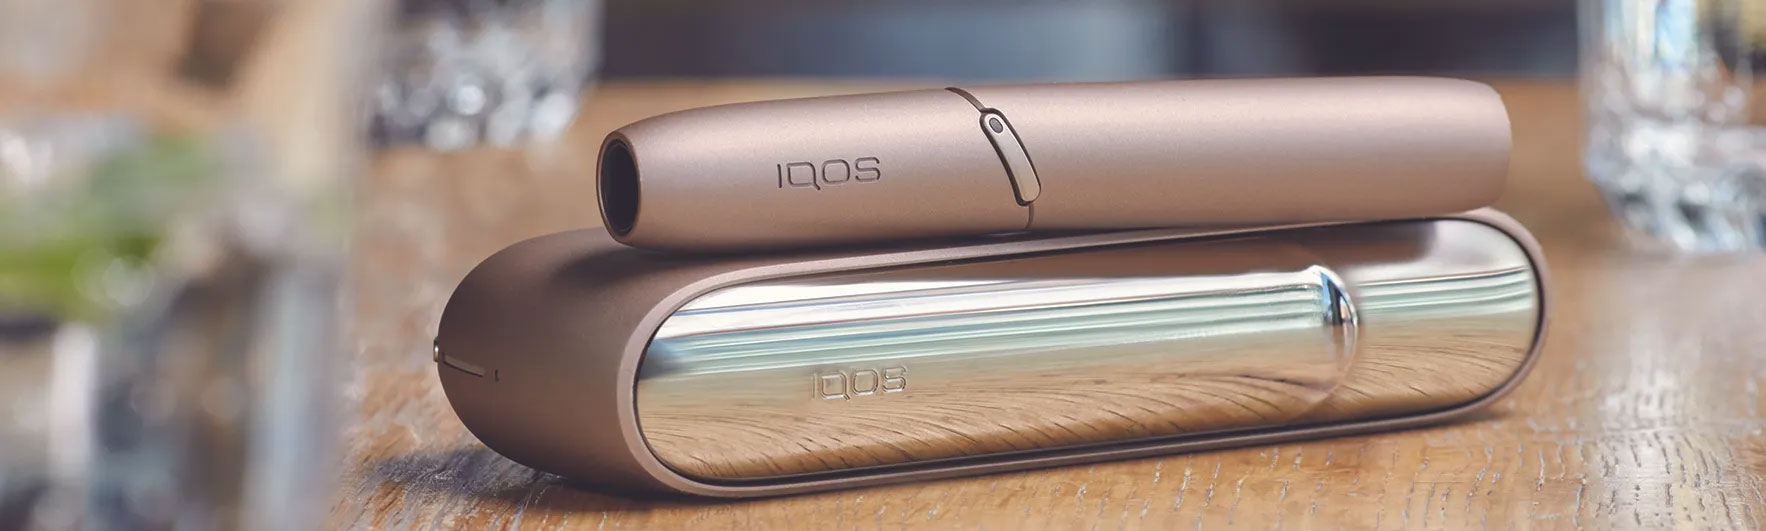 IQOS 3 DUO gives way to new generation technology.